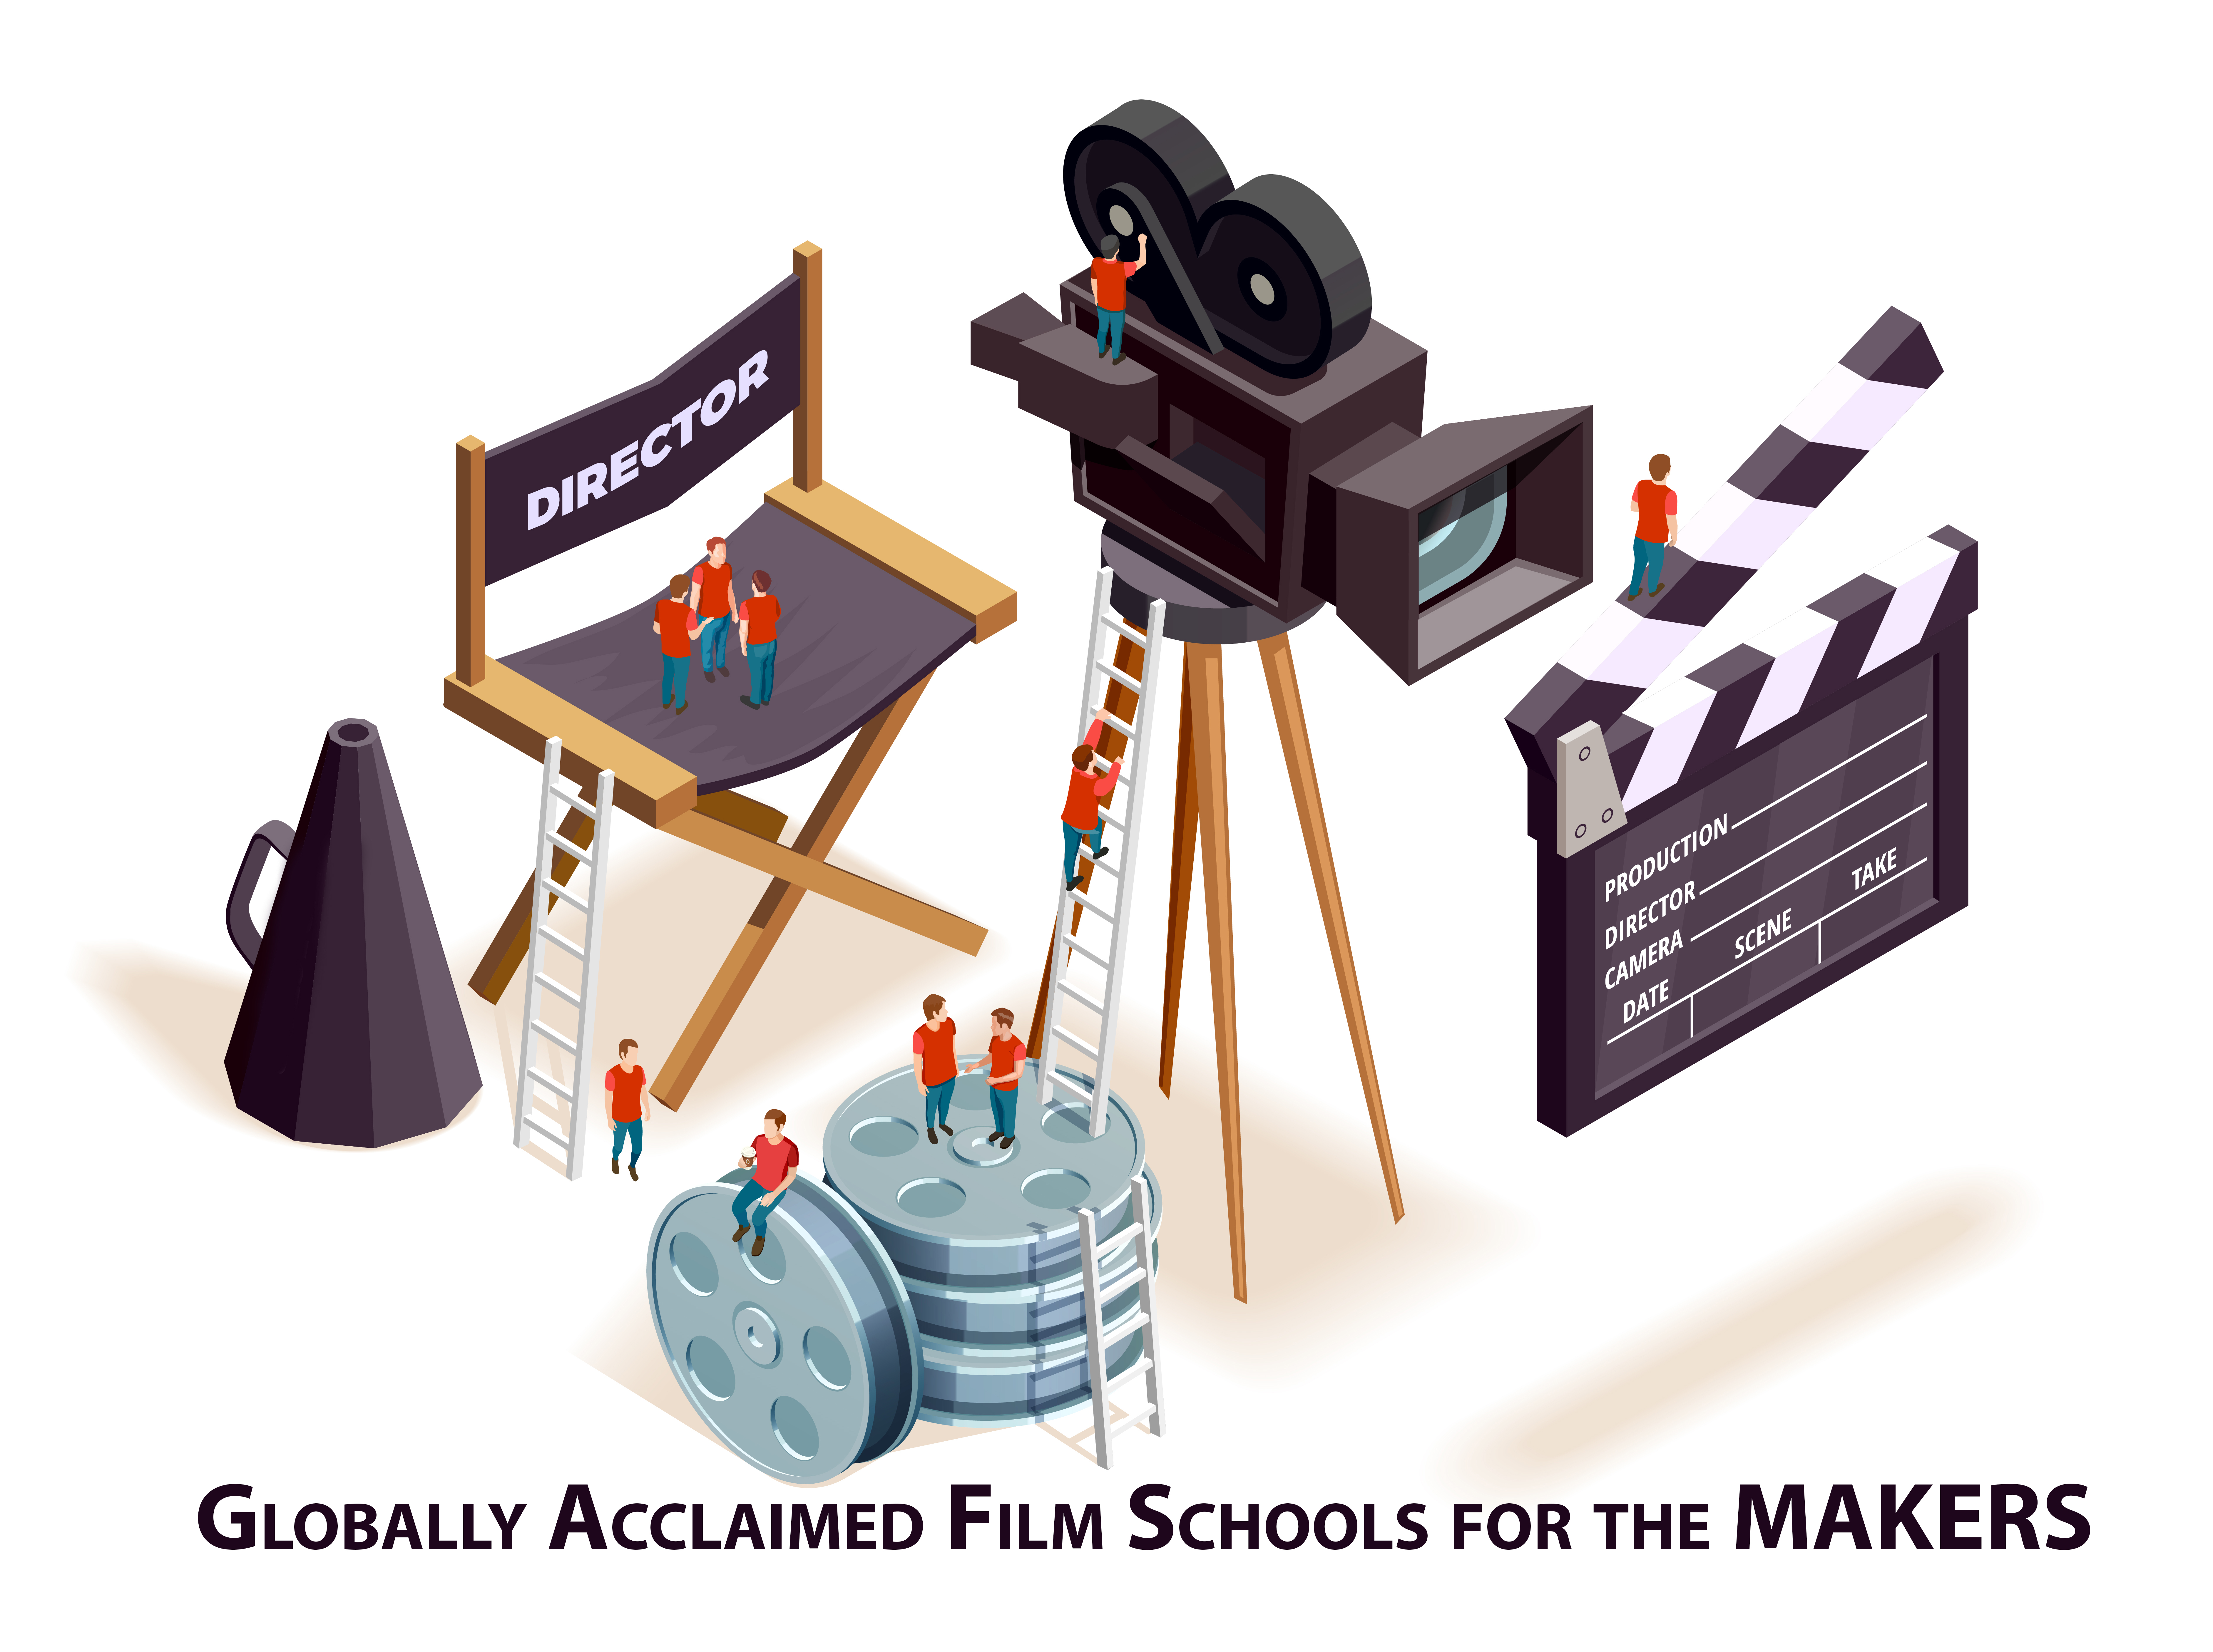 Six Globally Acclaimed Film Schools for the Makers